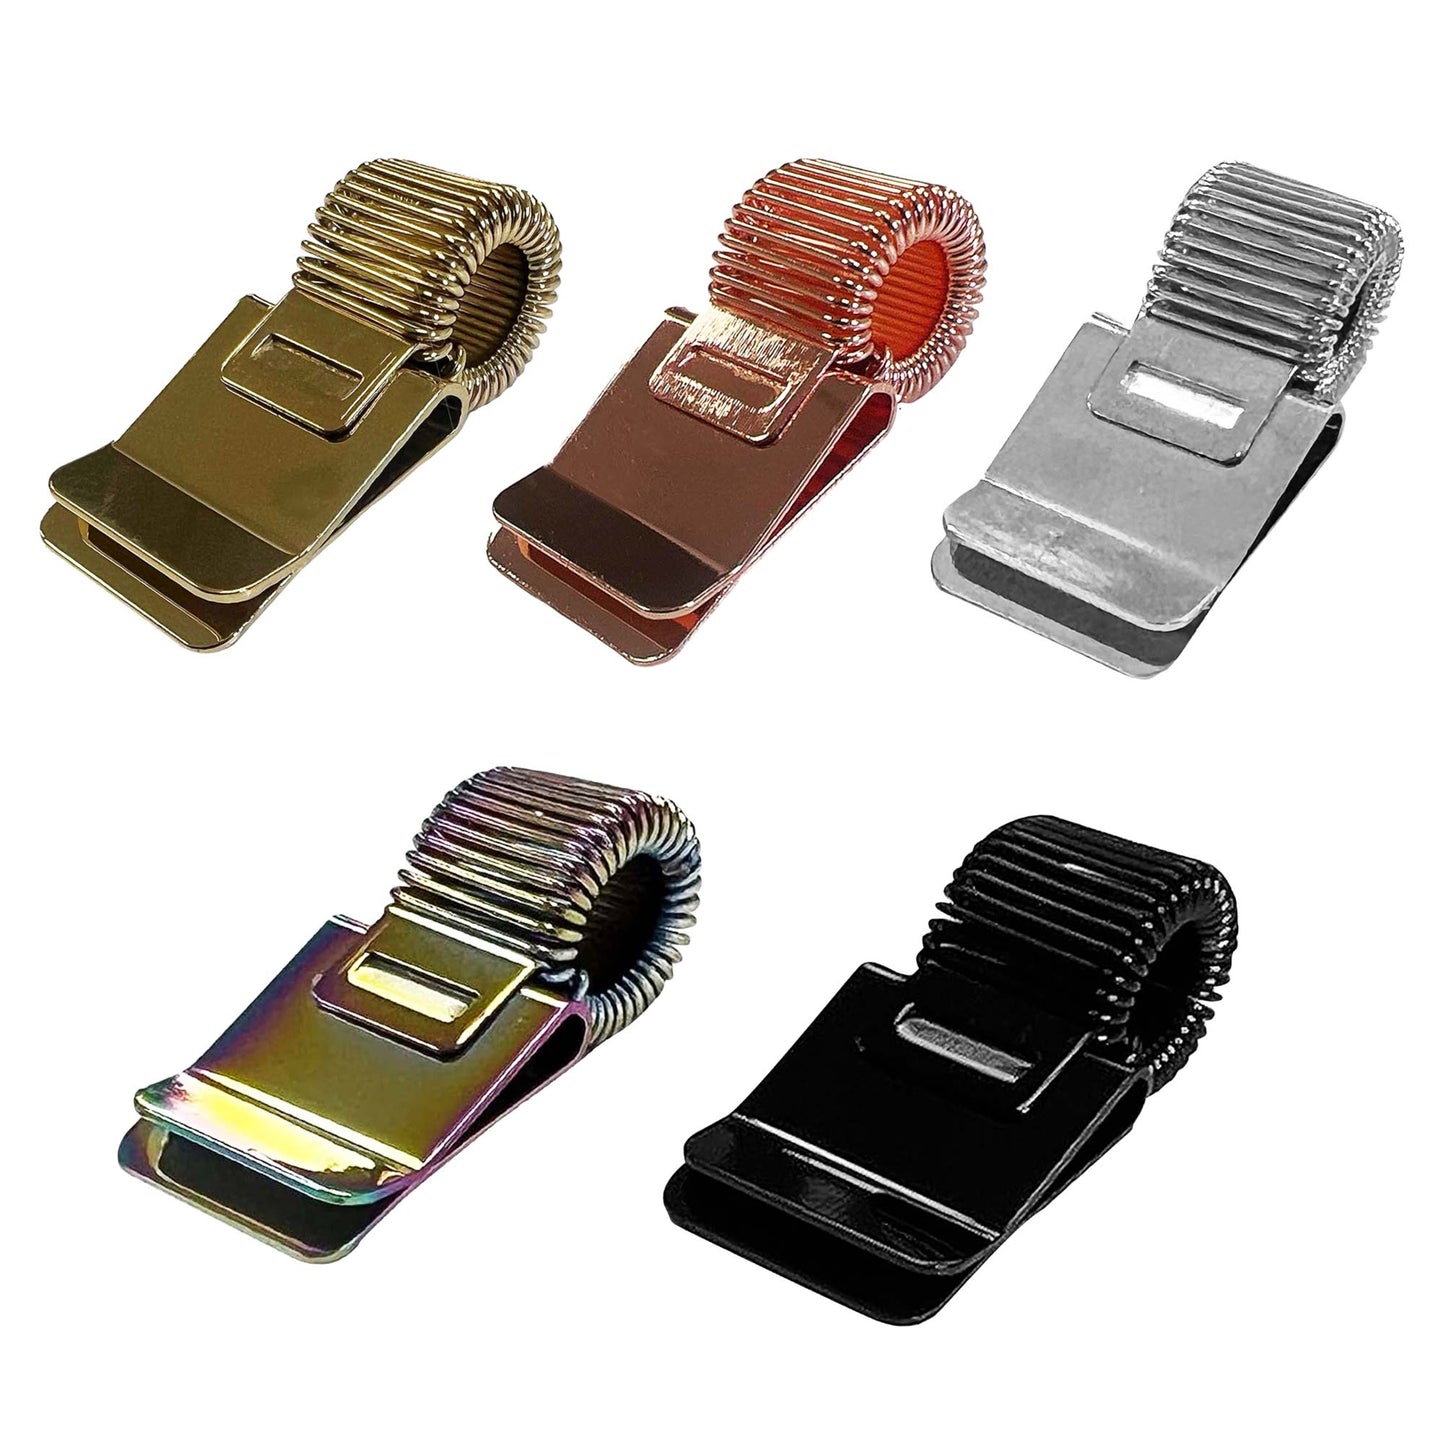 Pack of 5 Metal Pen Holder Clips for Notebooks and Clipboards